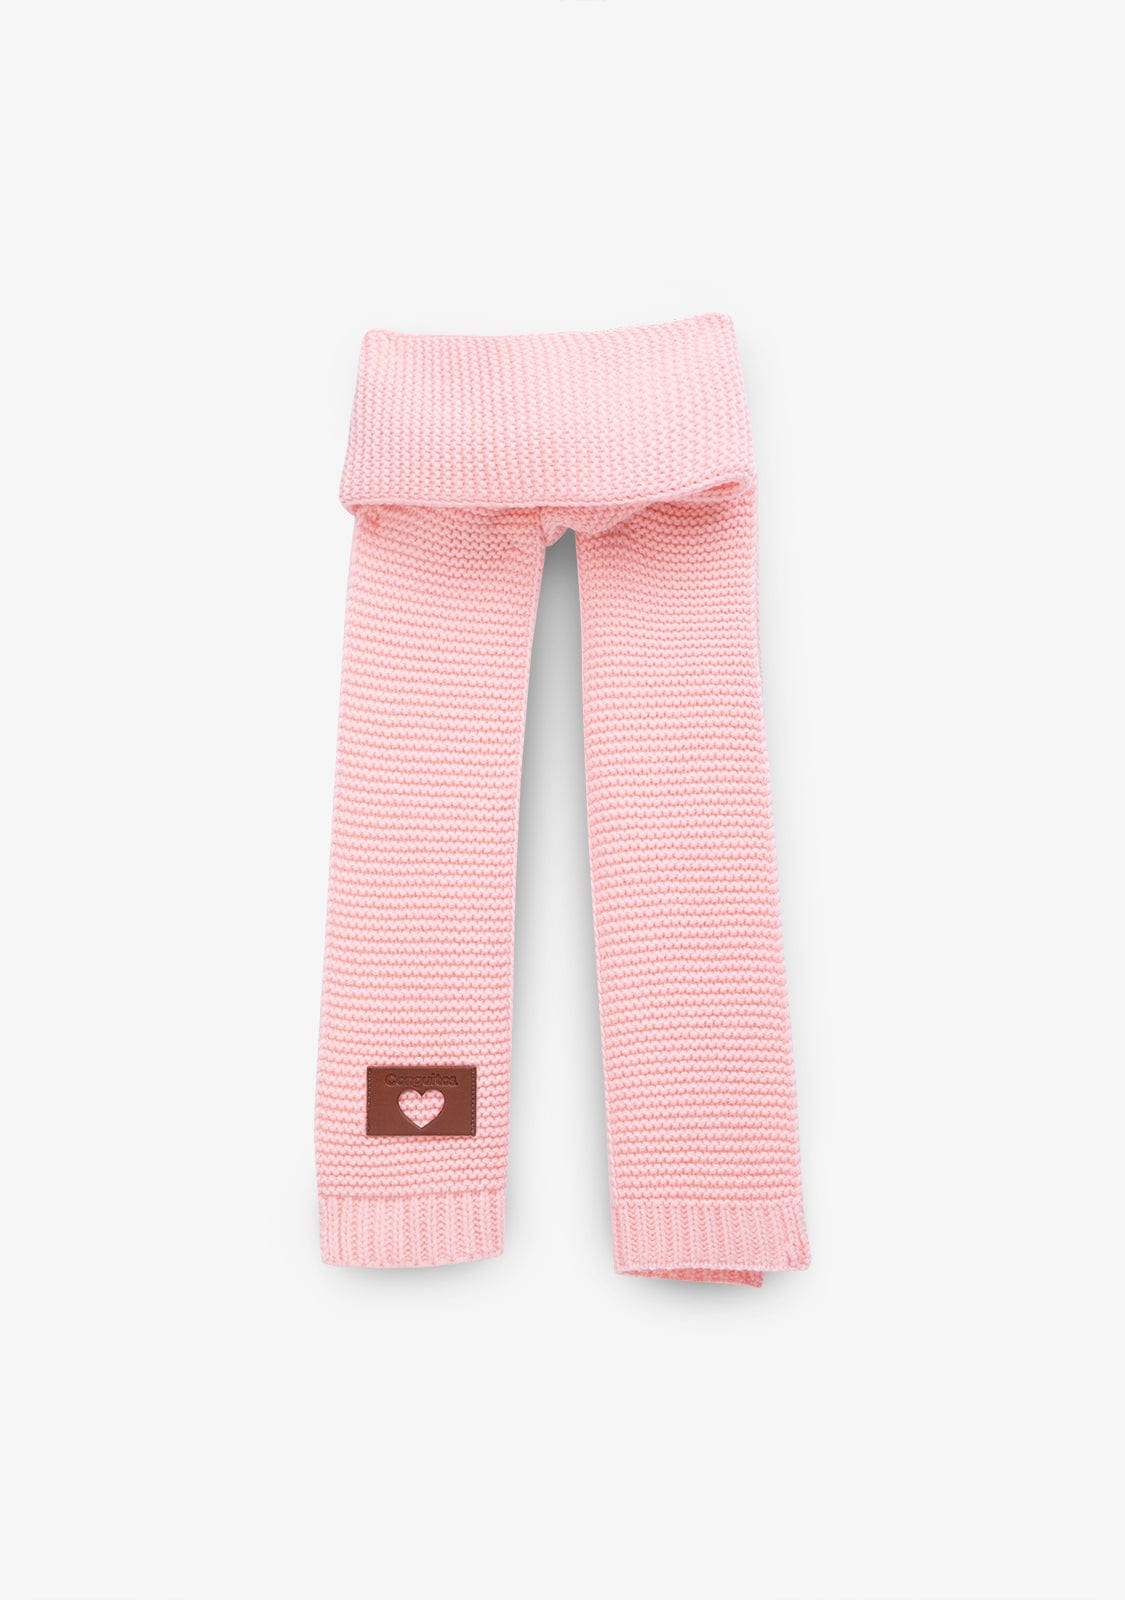 CONGUITOS TEXTIL Accessories Girl's Pink Scarf